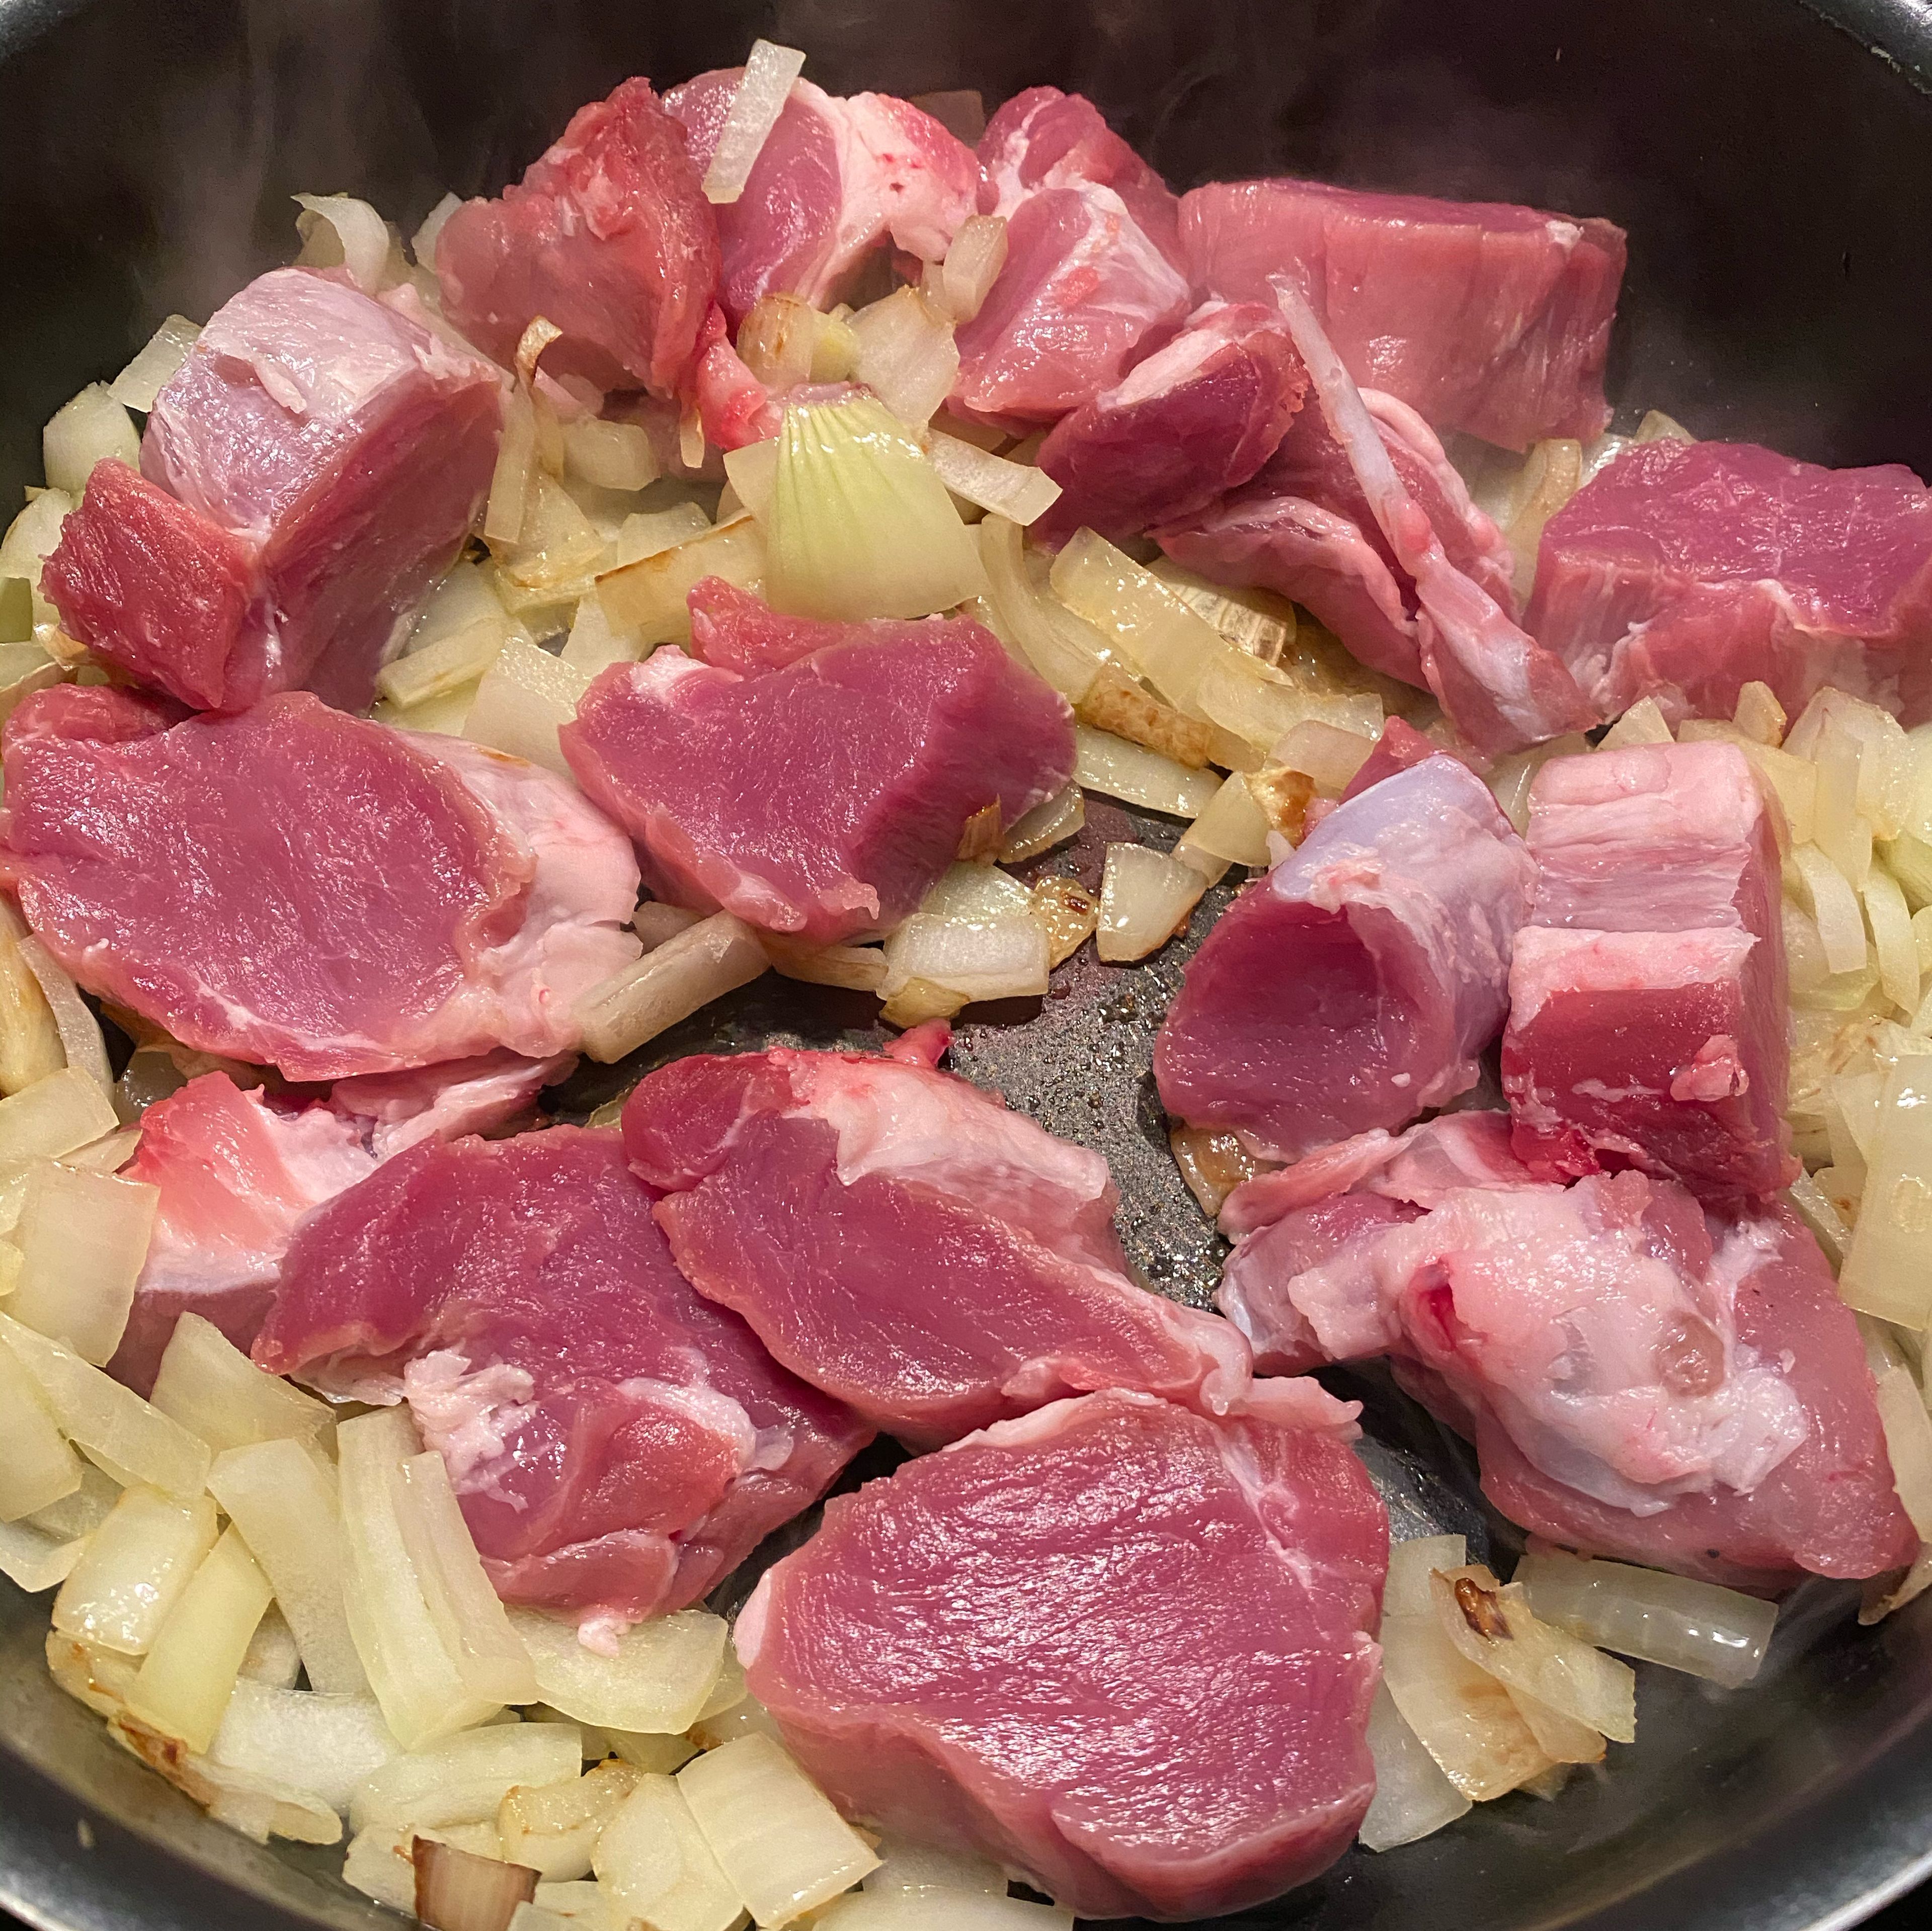 Add the meat to the onions when they start becoming tender and brown, cook for a couple of minutes on each side so the meat gets brown